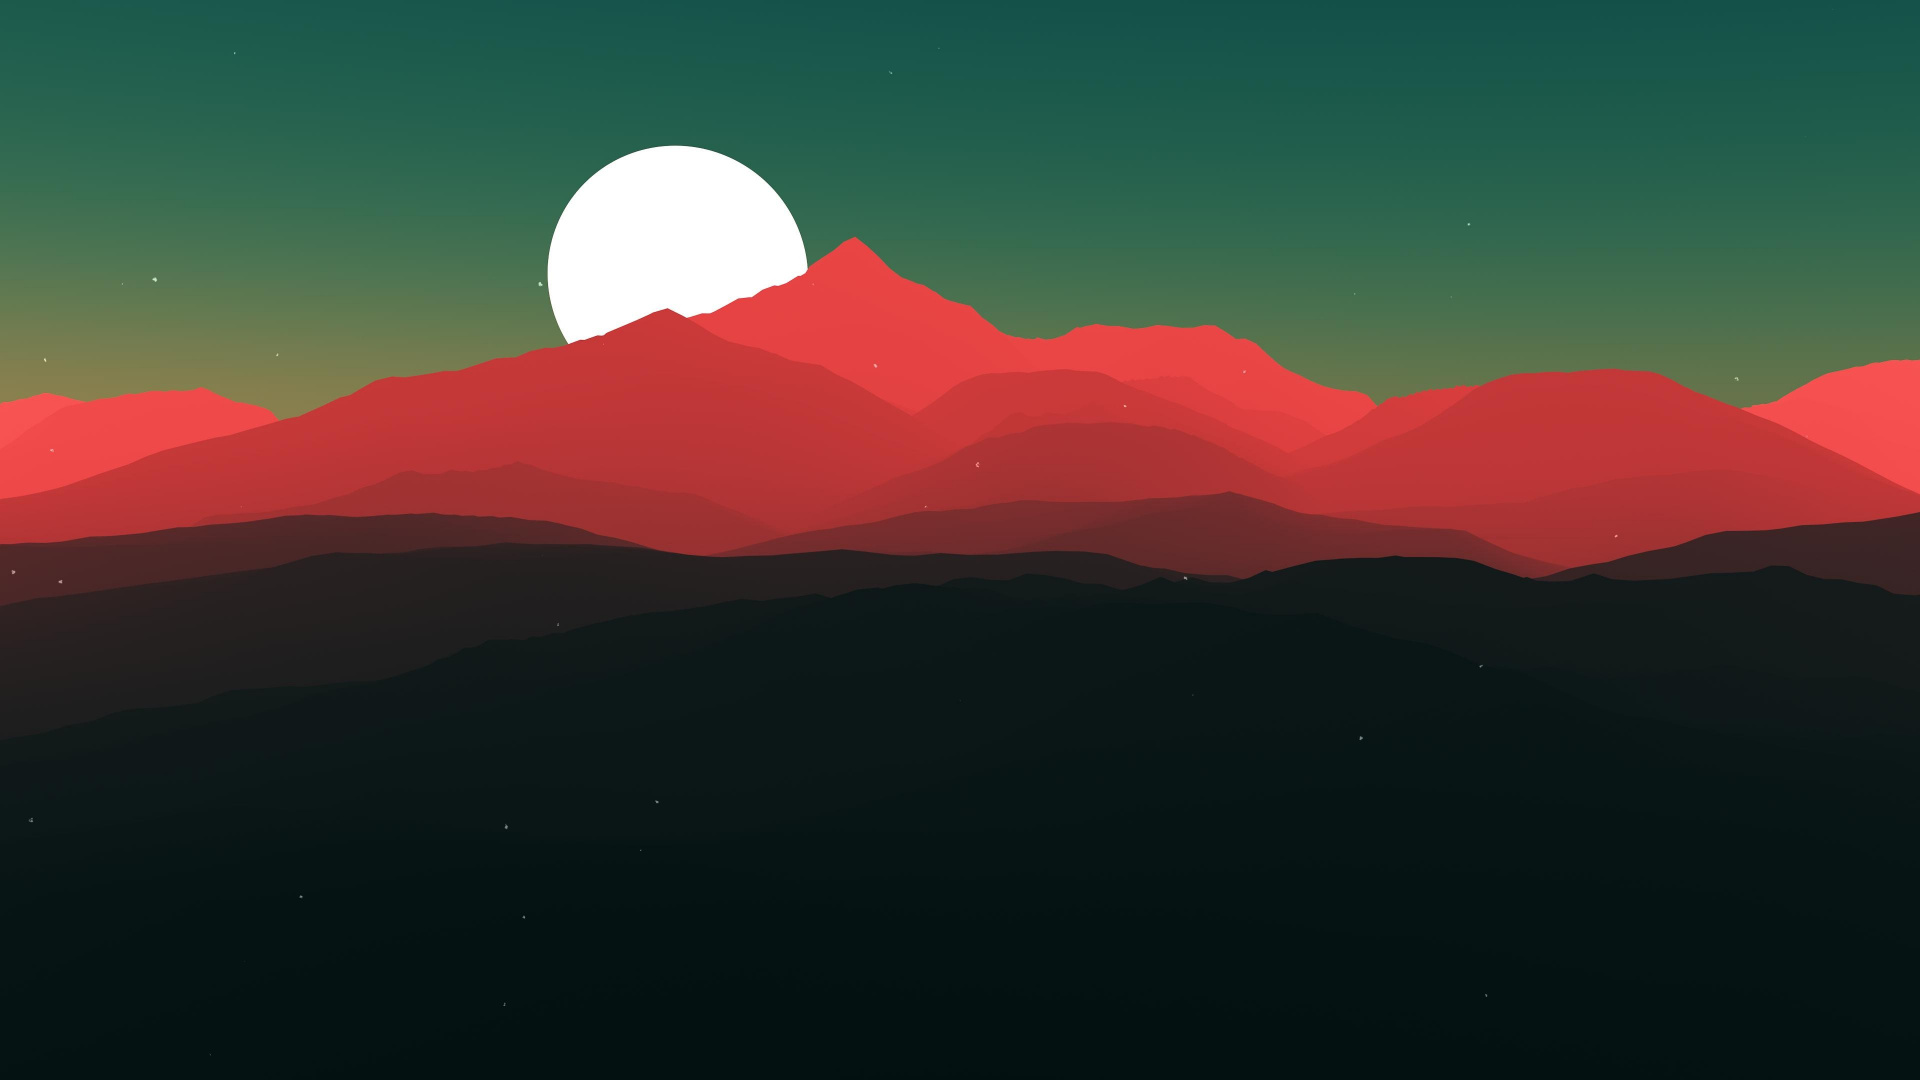 Silhouette of Mountain During Night Time. Wallpaper in 1920x1080 Resolution